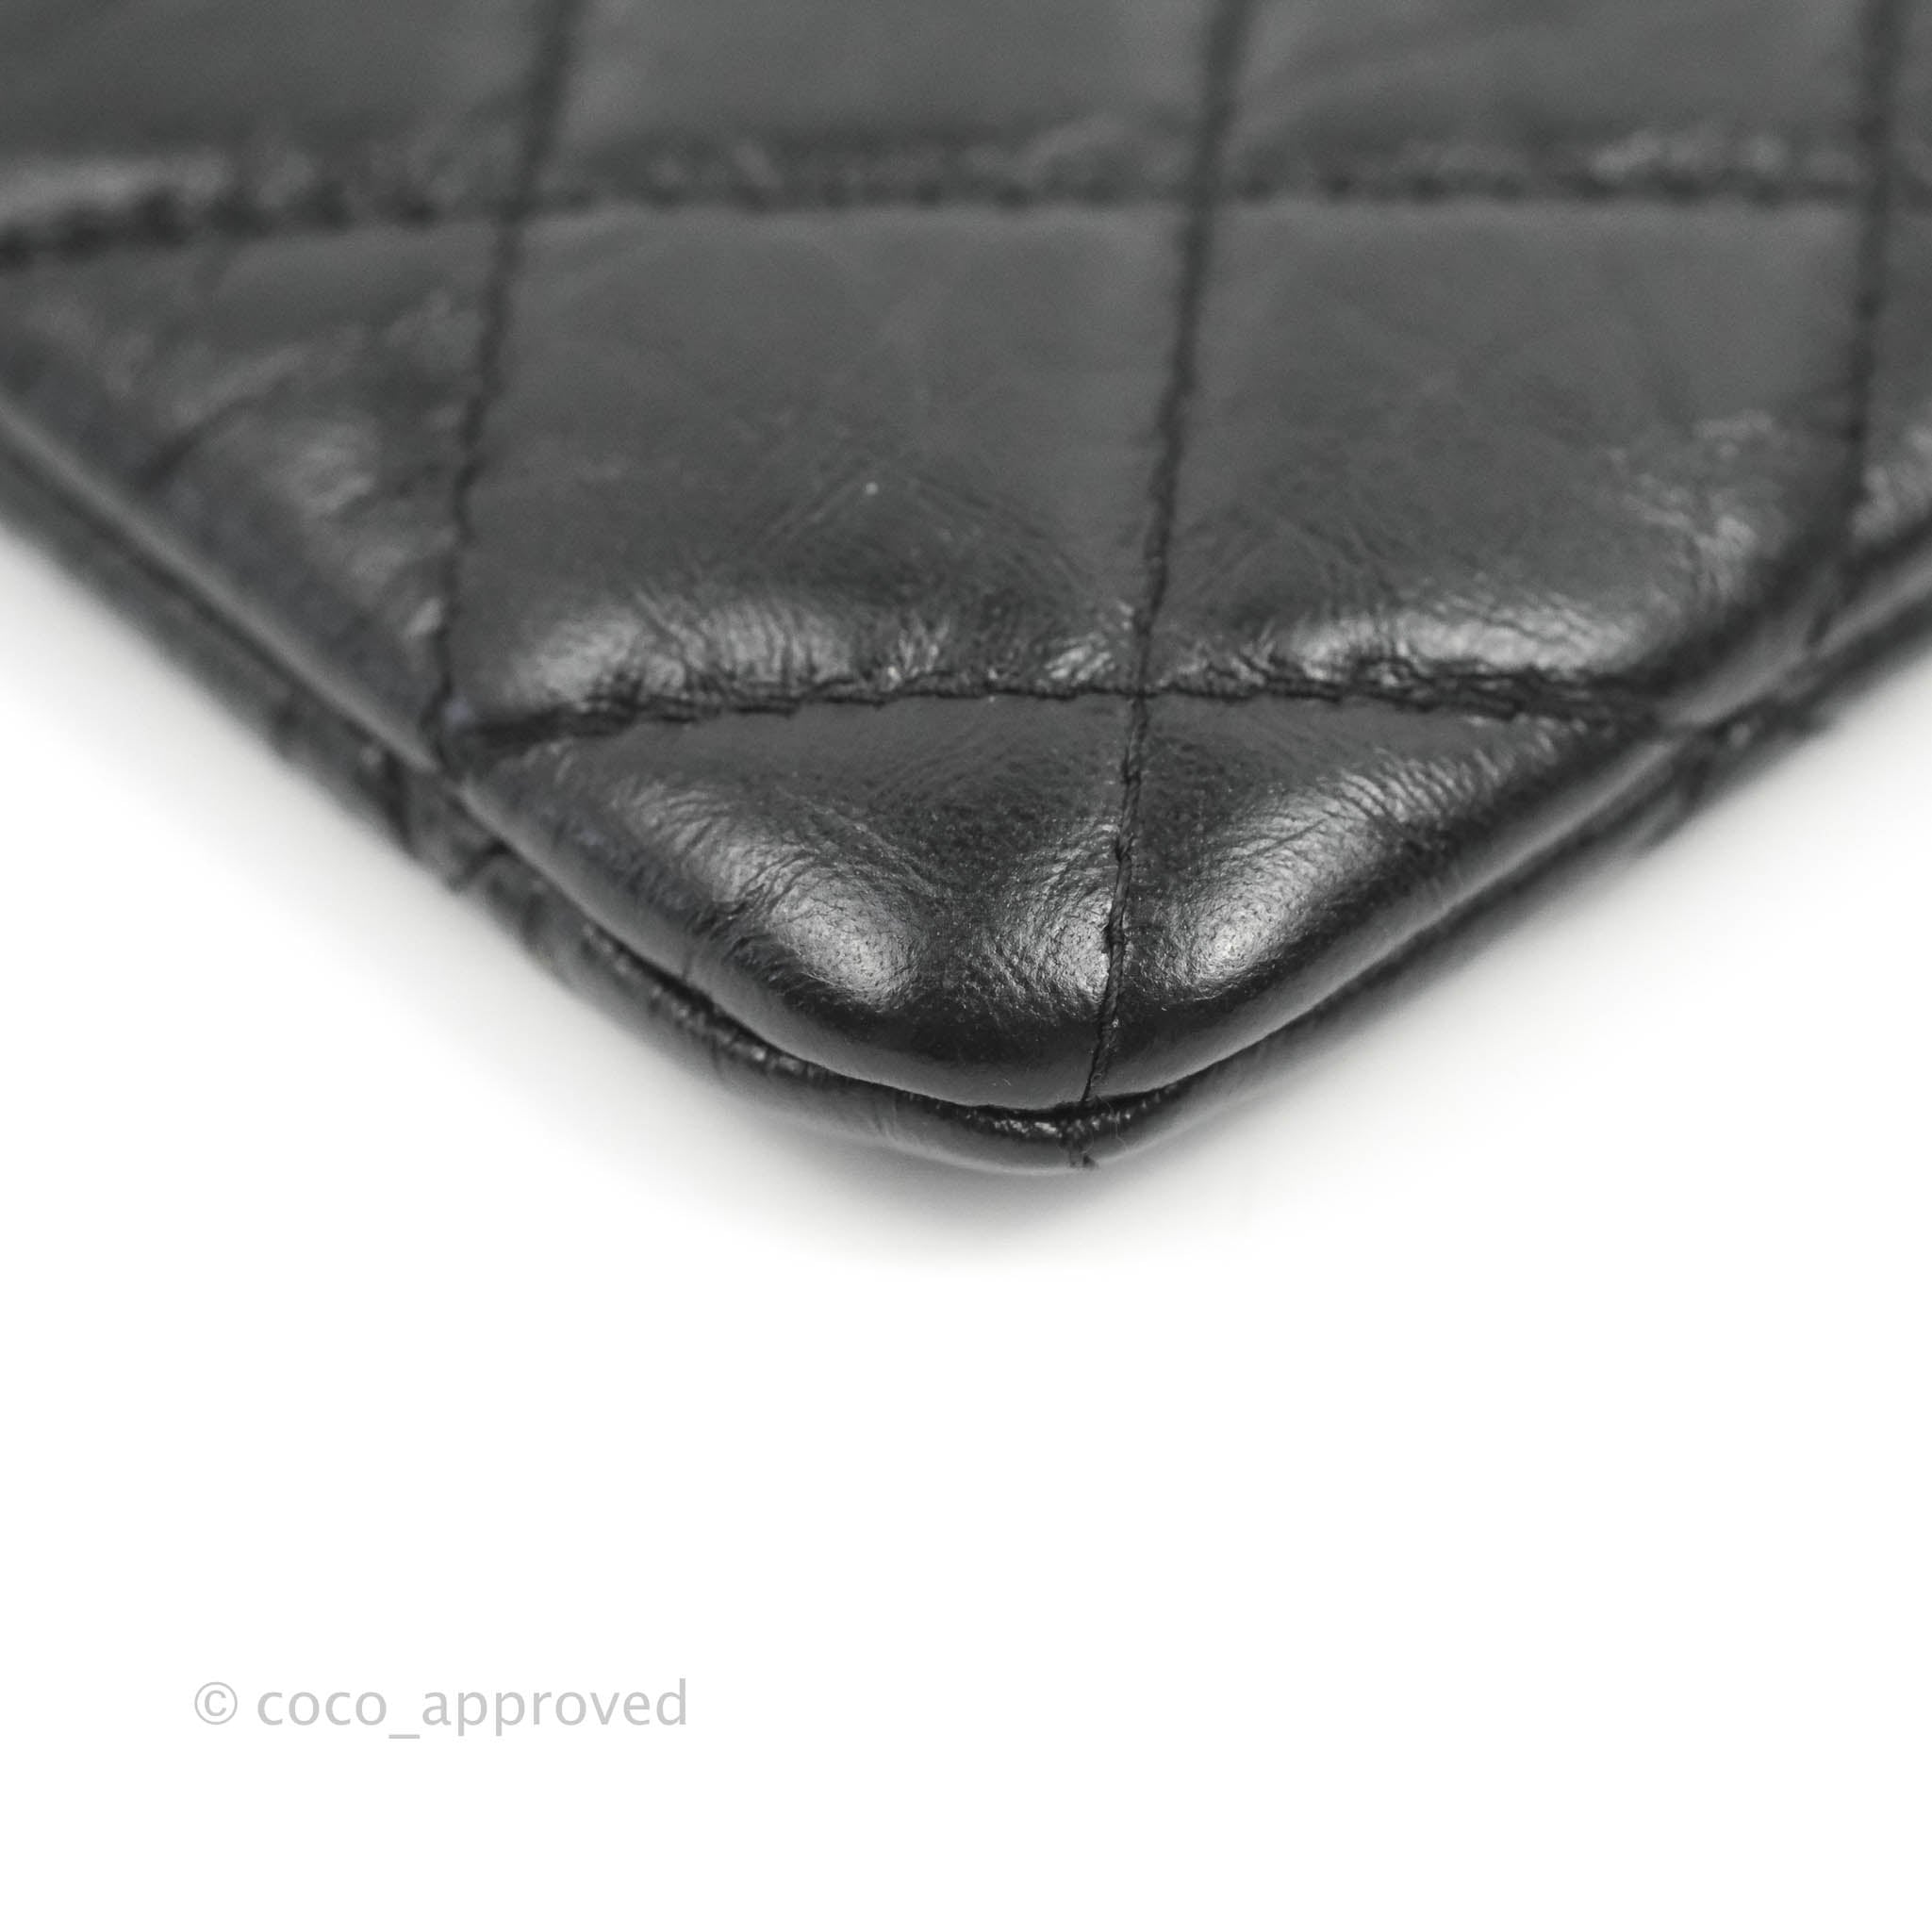 Chanel Quilted Mini Reissue O Case So Black Aged Calfskin